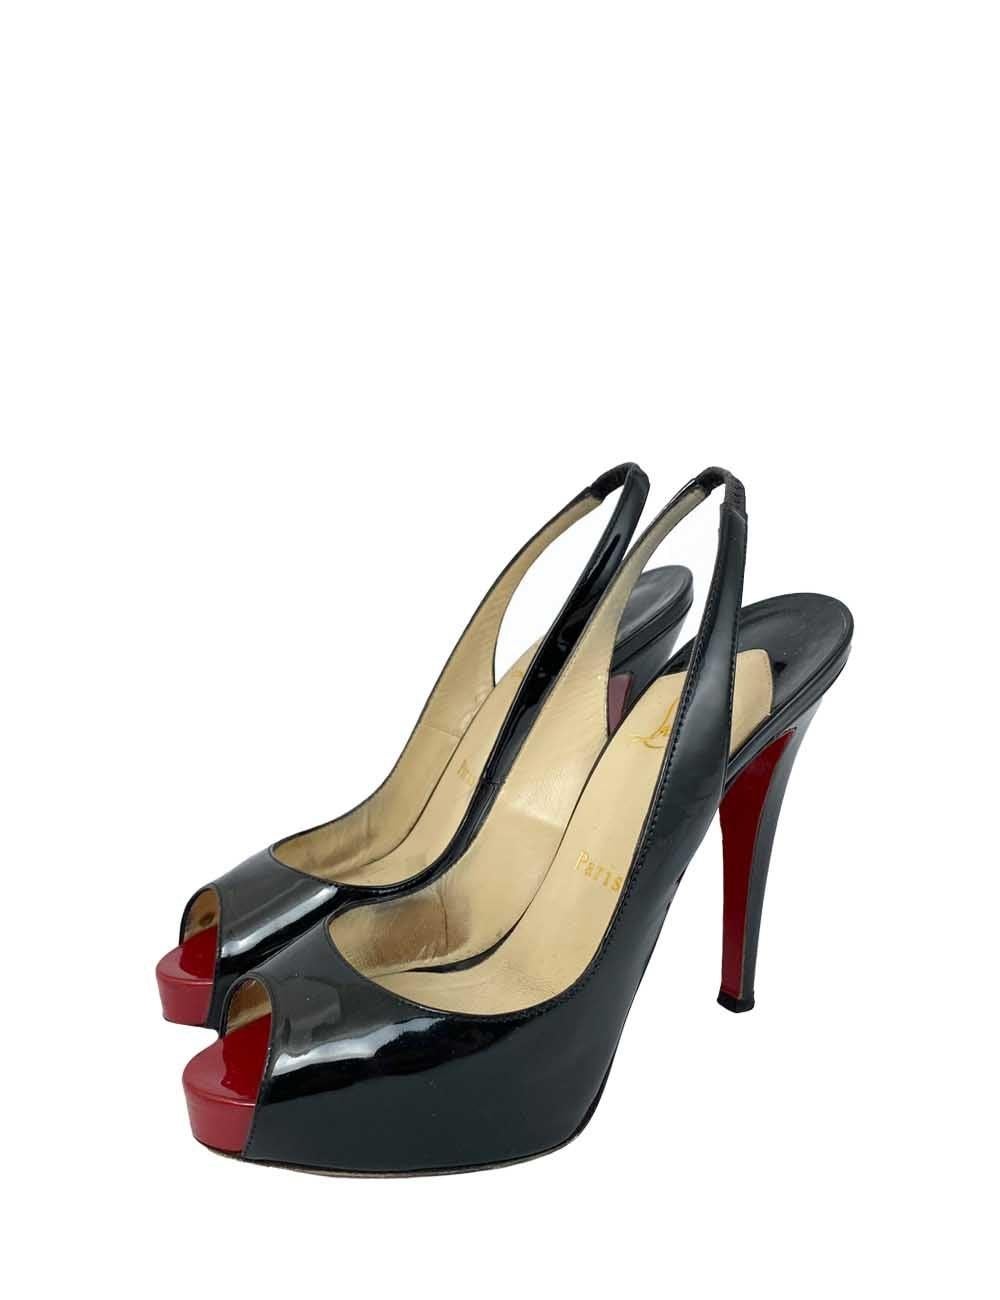 Black Christian Louboutin EU 37.5 Patent Leather Open-Toed Pumps For Sale